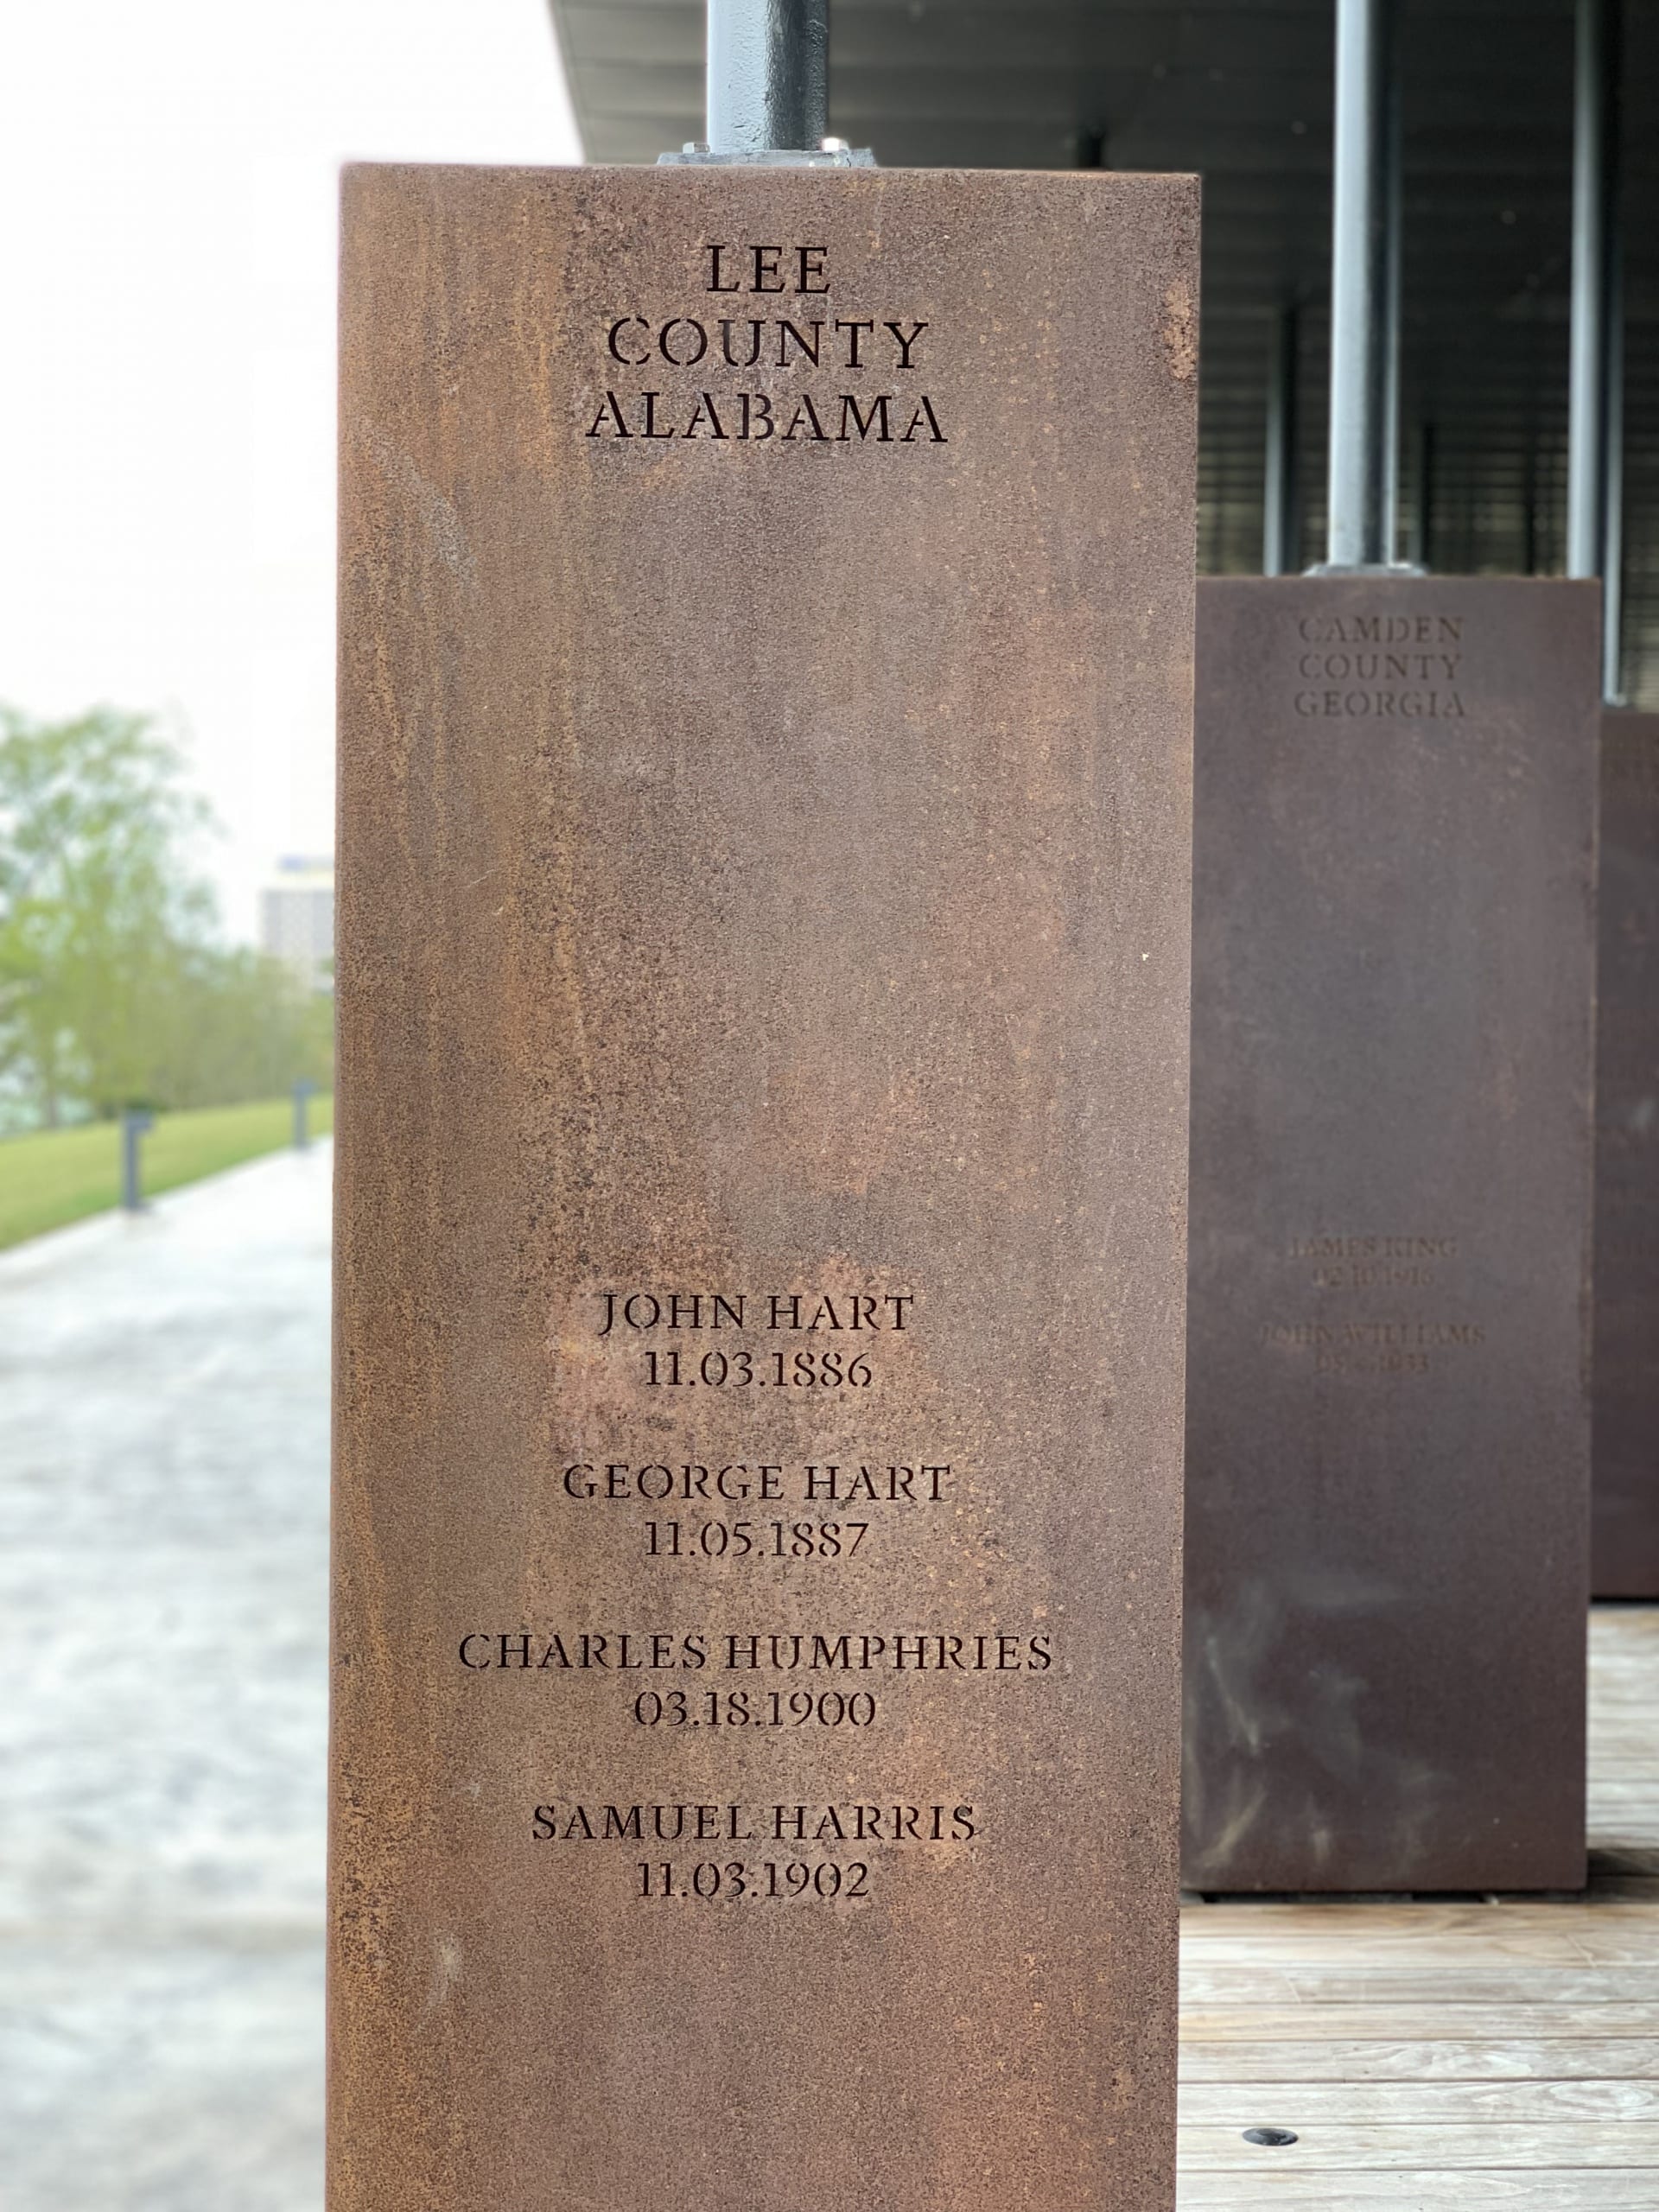 detail of a memorial stele "Lee County Alabama" with names of 4 lynching victims